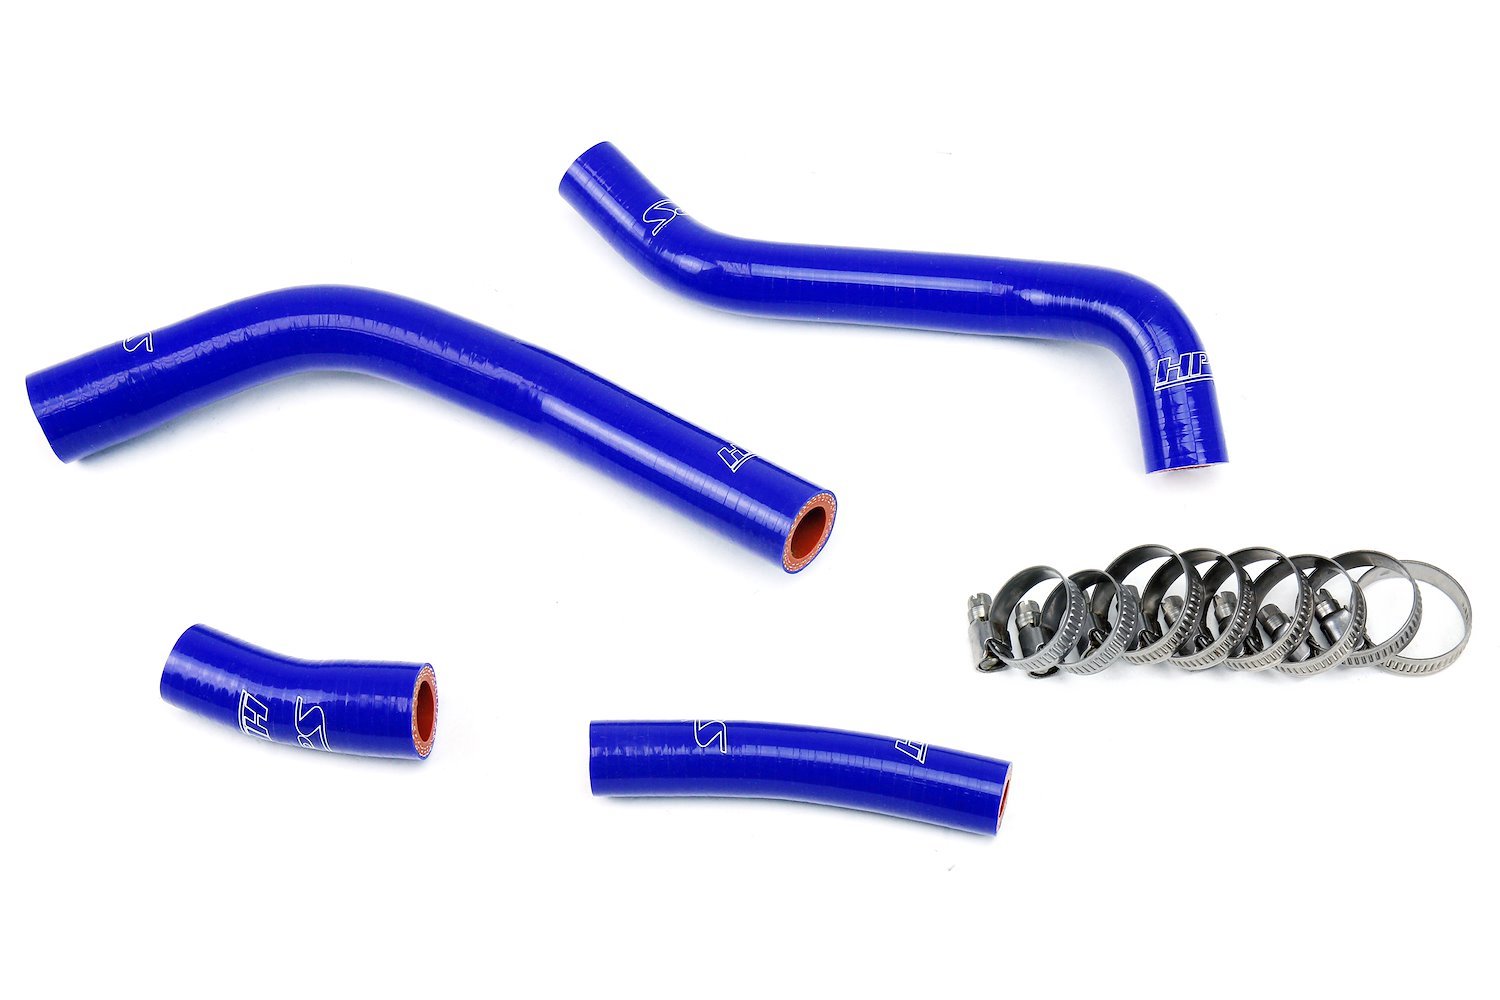 57-1757-BLUE Radiator Hose Kit, 3-Ply Reinforced Silicone, Replaces Rubber Radiator Coolant Hoses